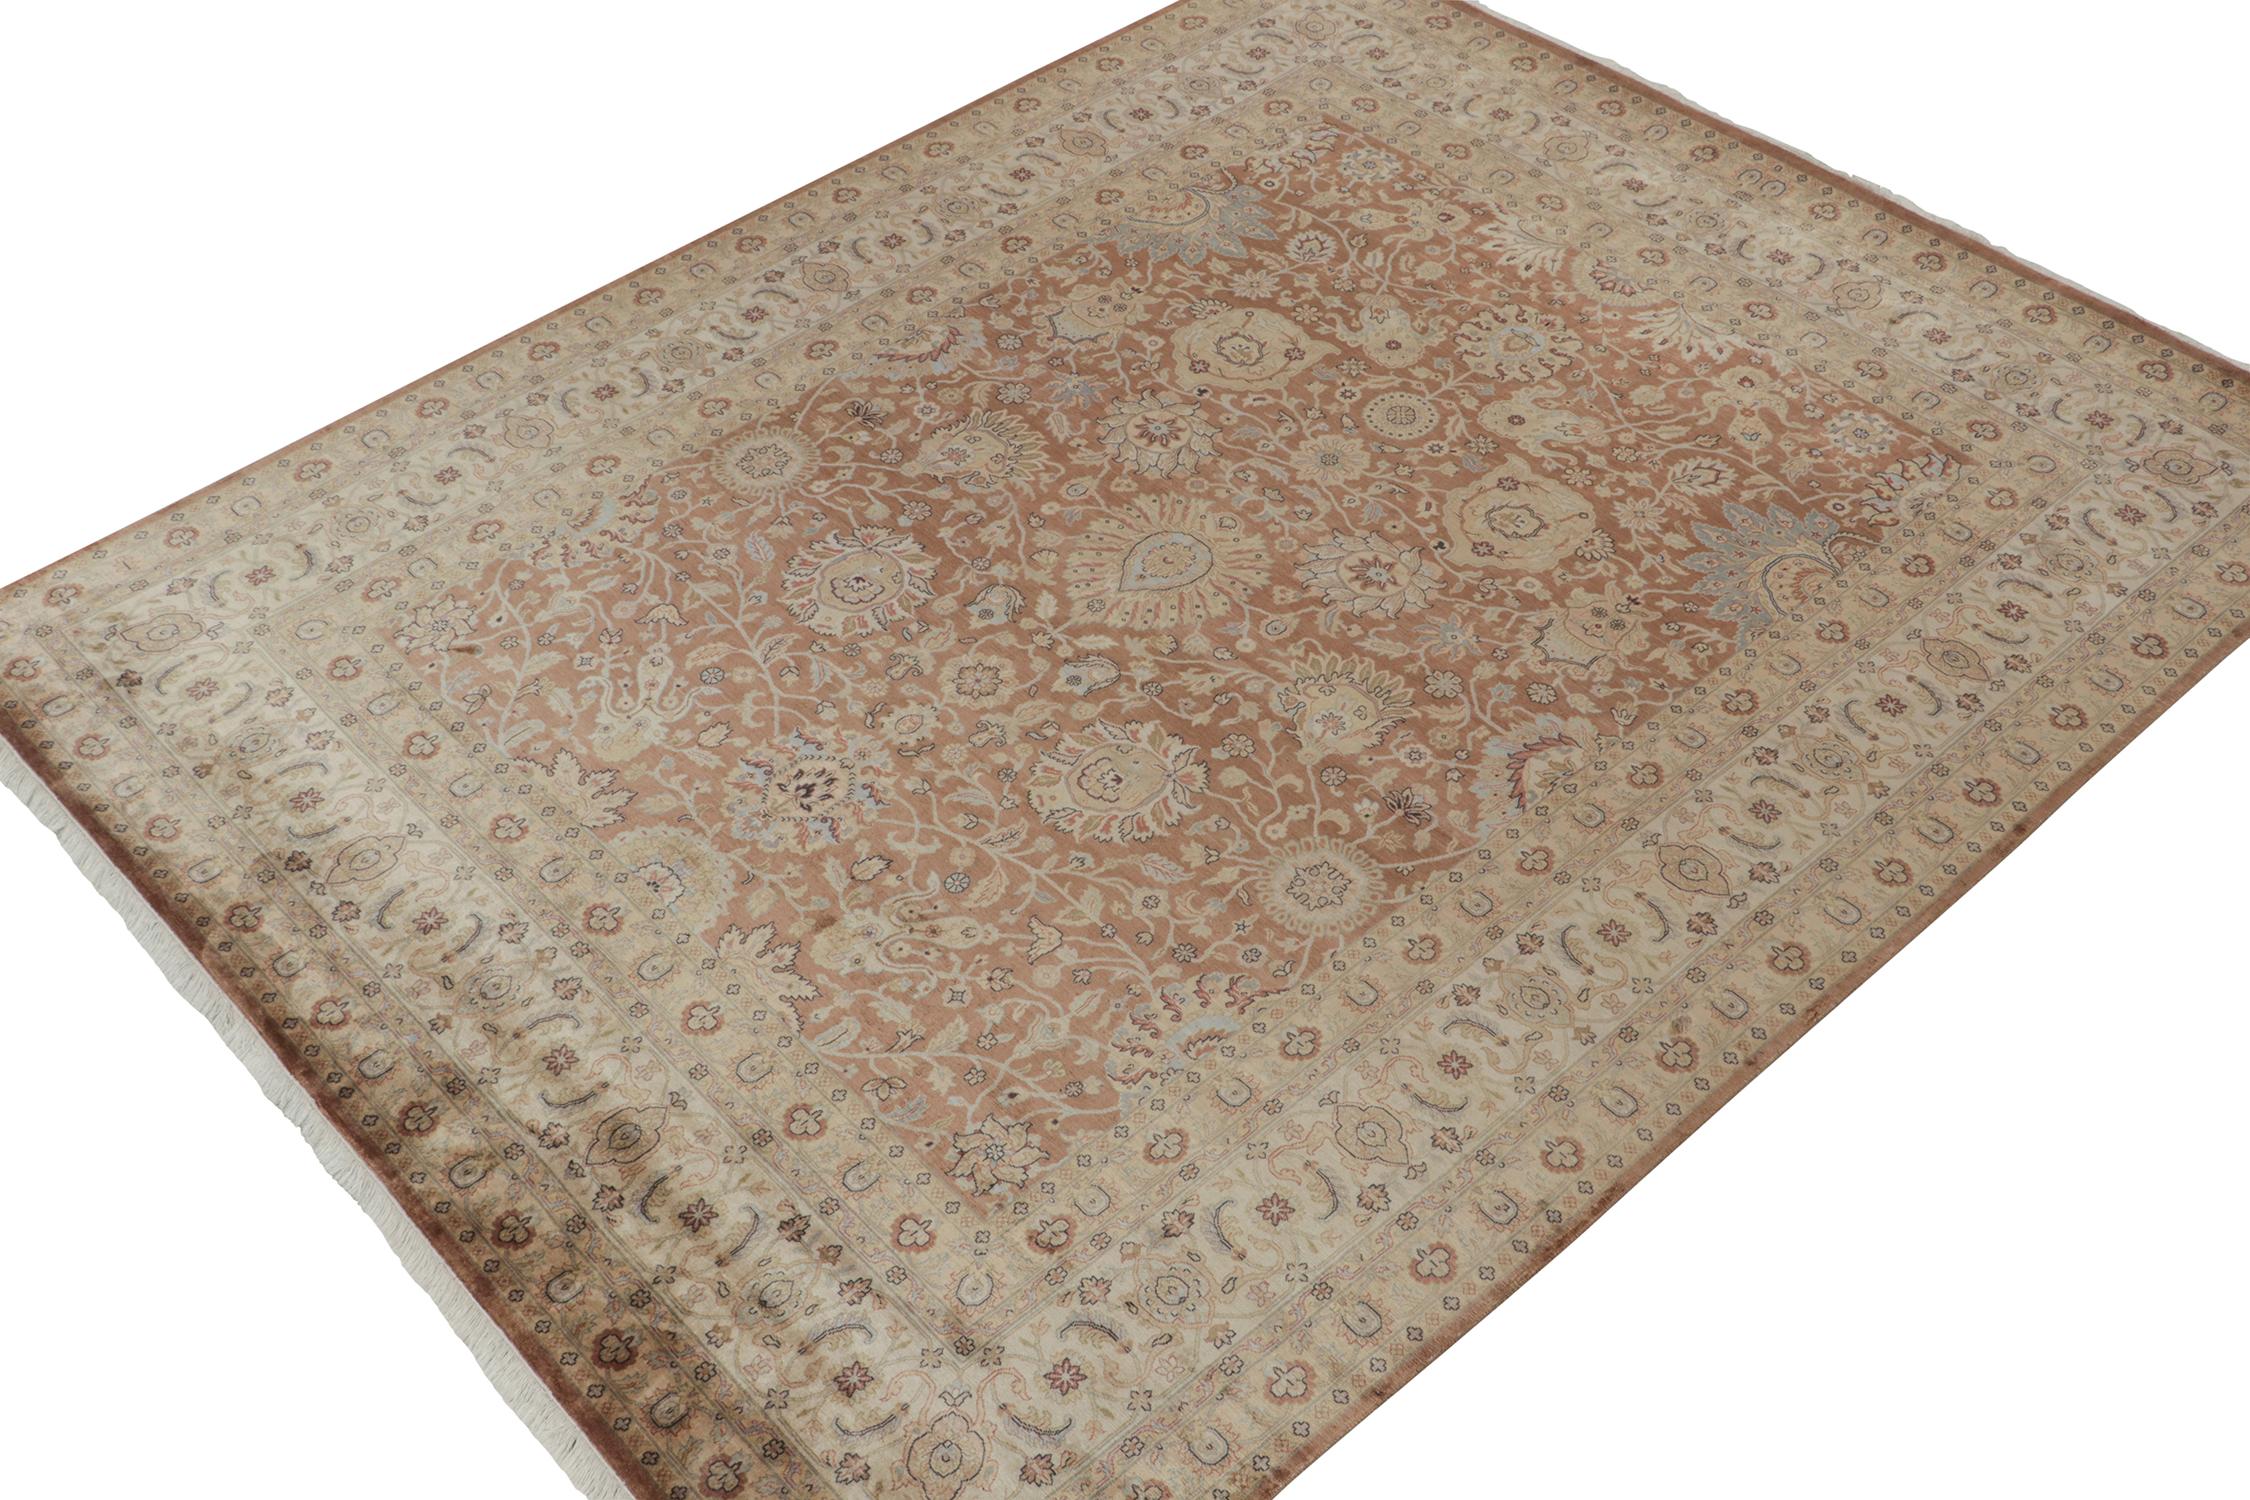 An 8x10 rug inspired by celebrated Tabriz styles, from Rug & Kilim’s Modern Classics Collection. Hand knotted in wool, playing an exceptional rust with beige-brown with blue floral patterns in classic grace and movement.
Further On the Design:
The